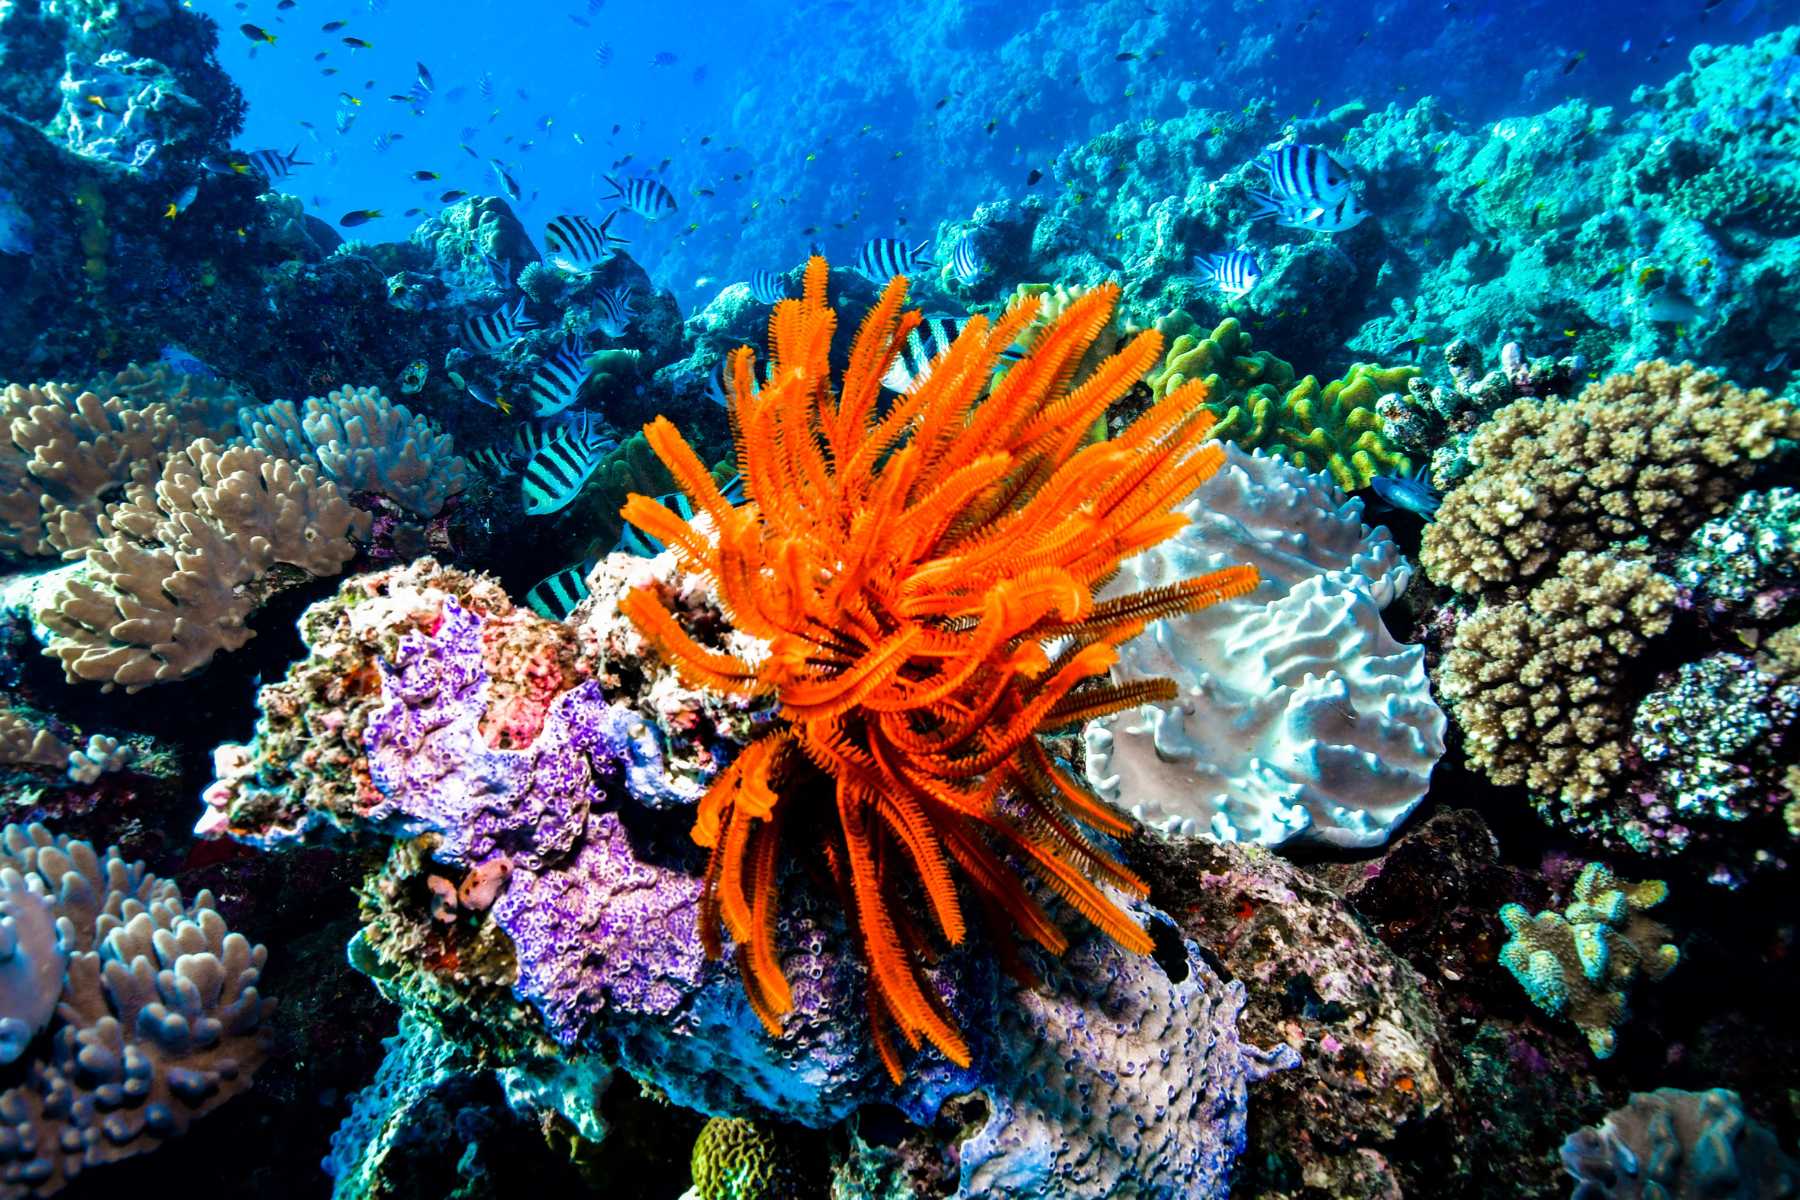 The Ultimate Great Barrier Reef Safari - Half Day Private Charter